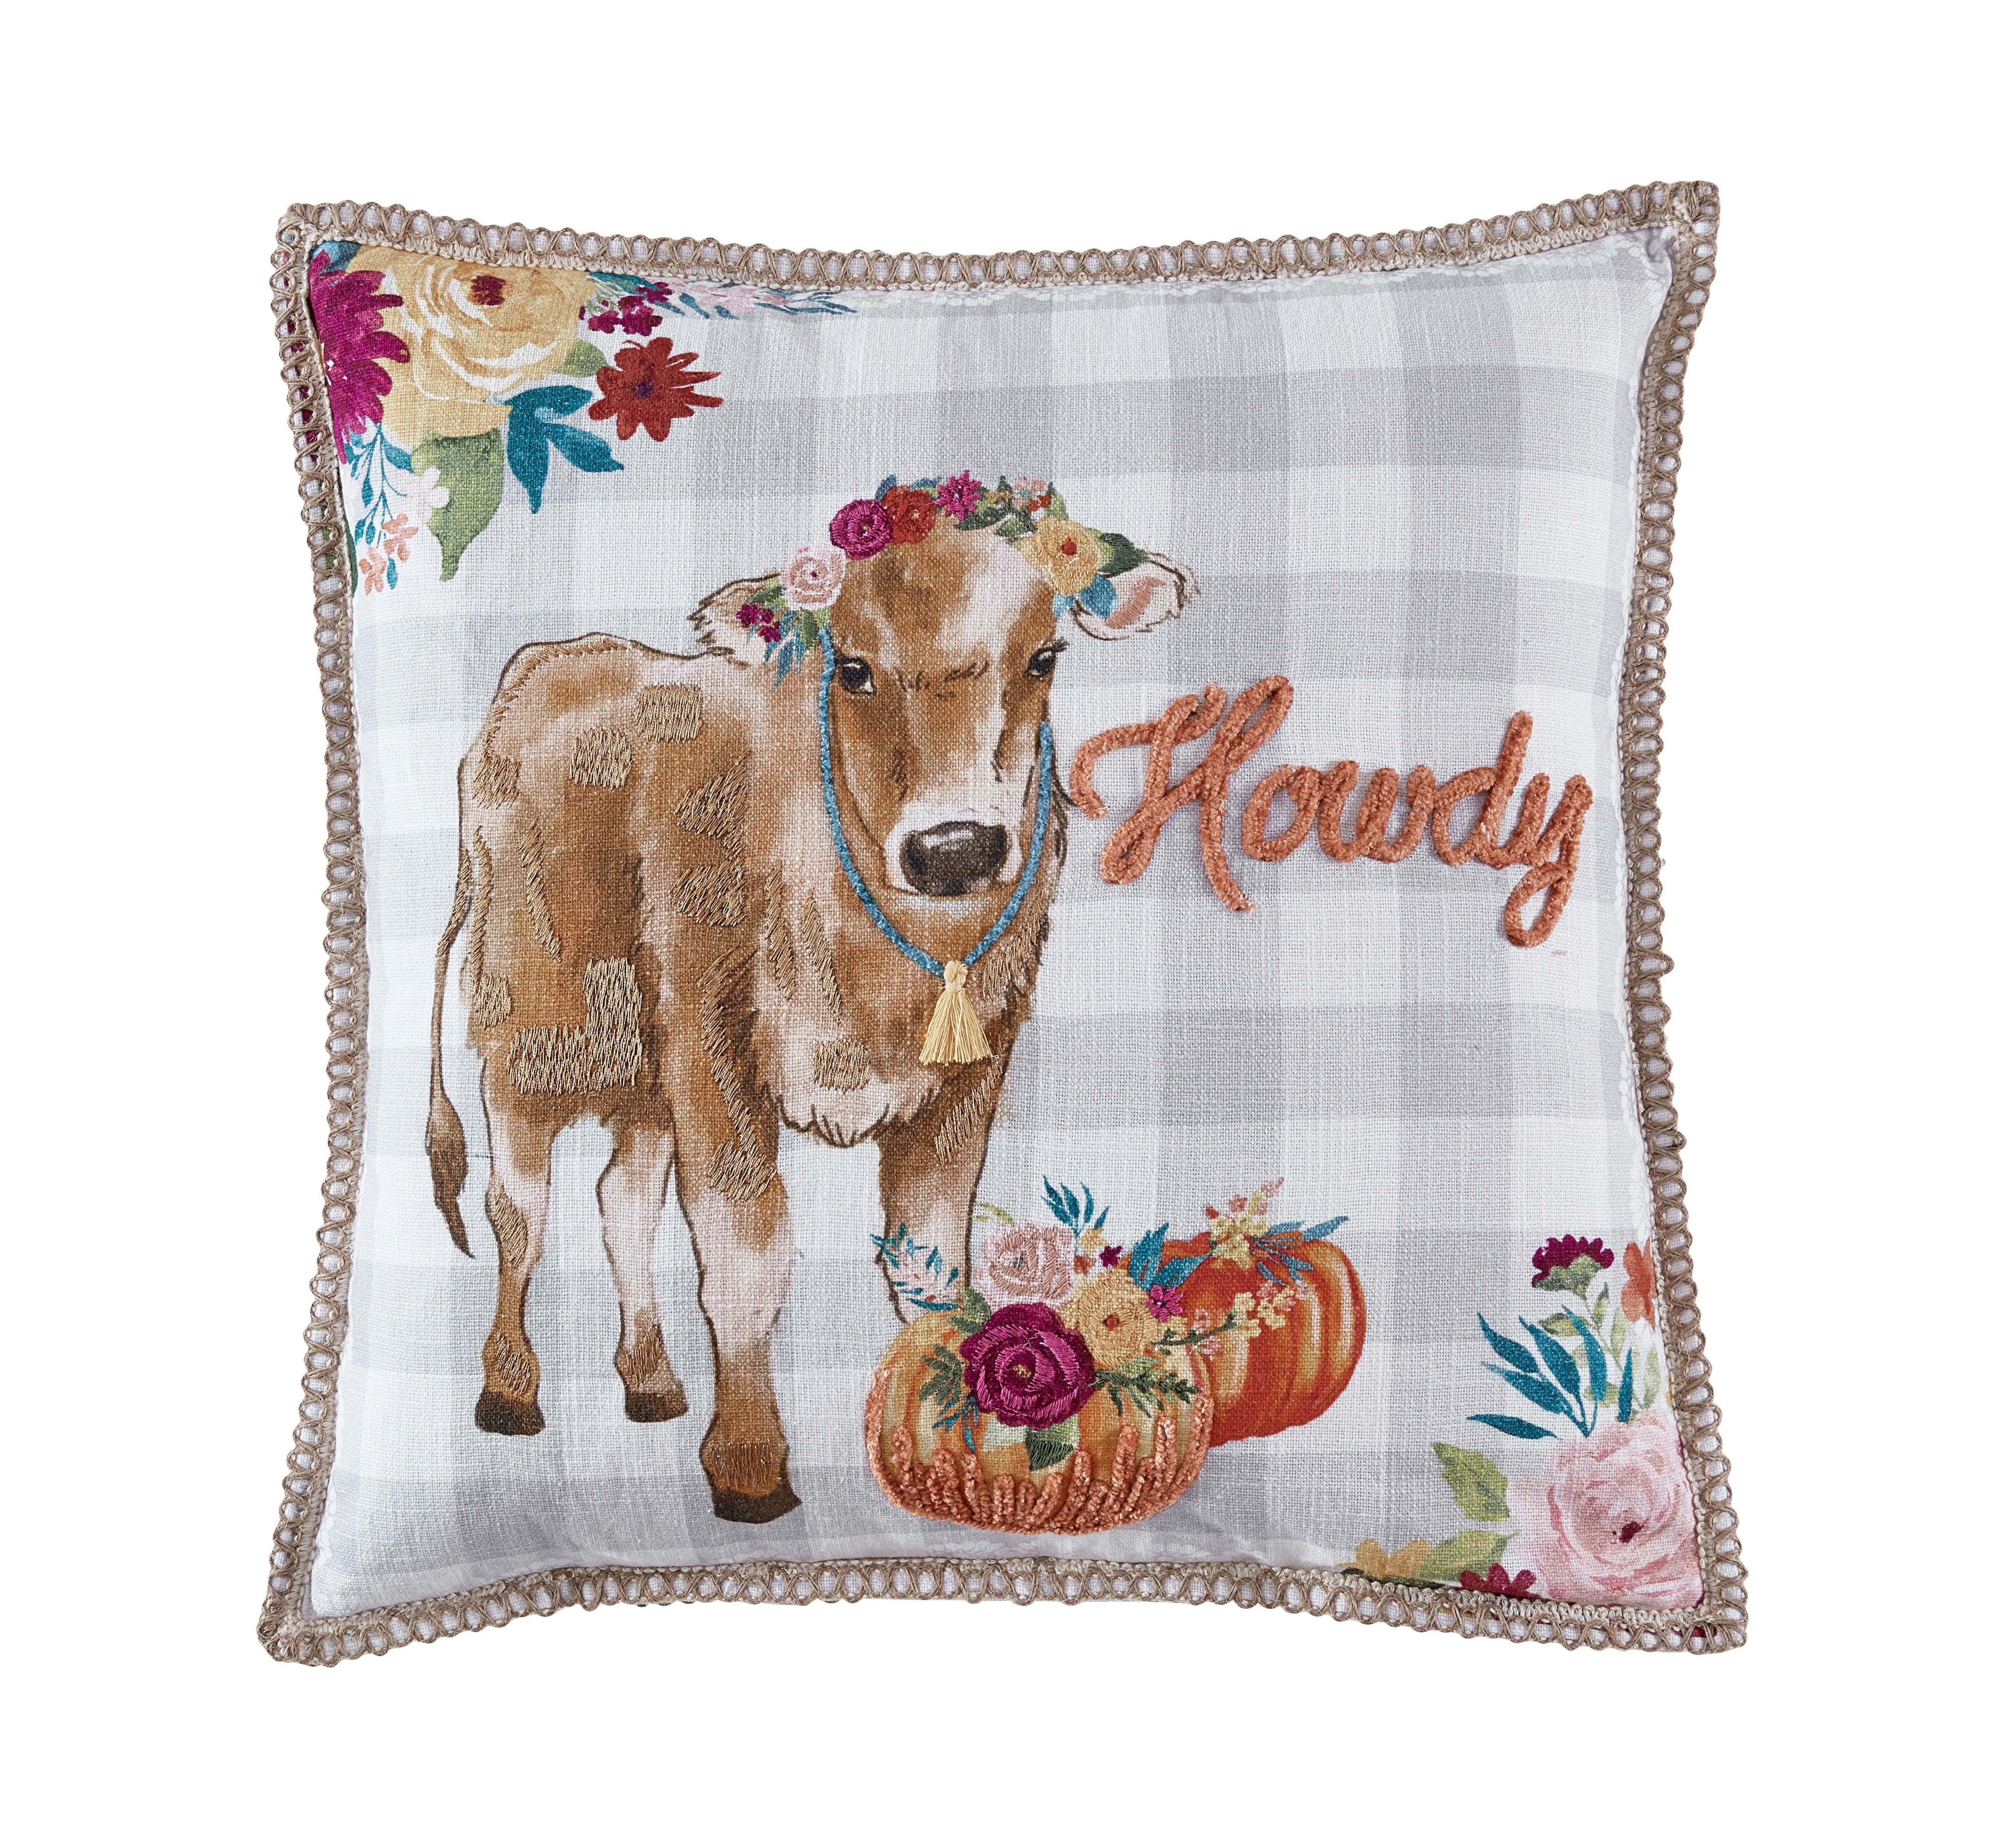 Funny Cow Cattle Decorations Pillow Covers 20x20 Set of 2, Cotton Linen  Reversible Throw Pillows Covers for Outdoor Couch Sofa Living Room Animal